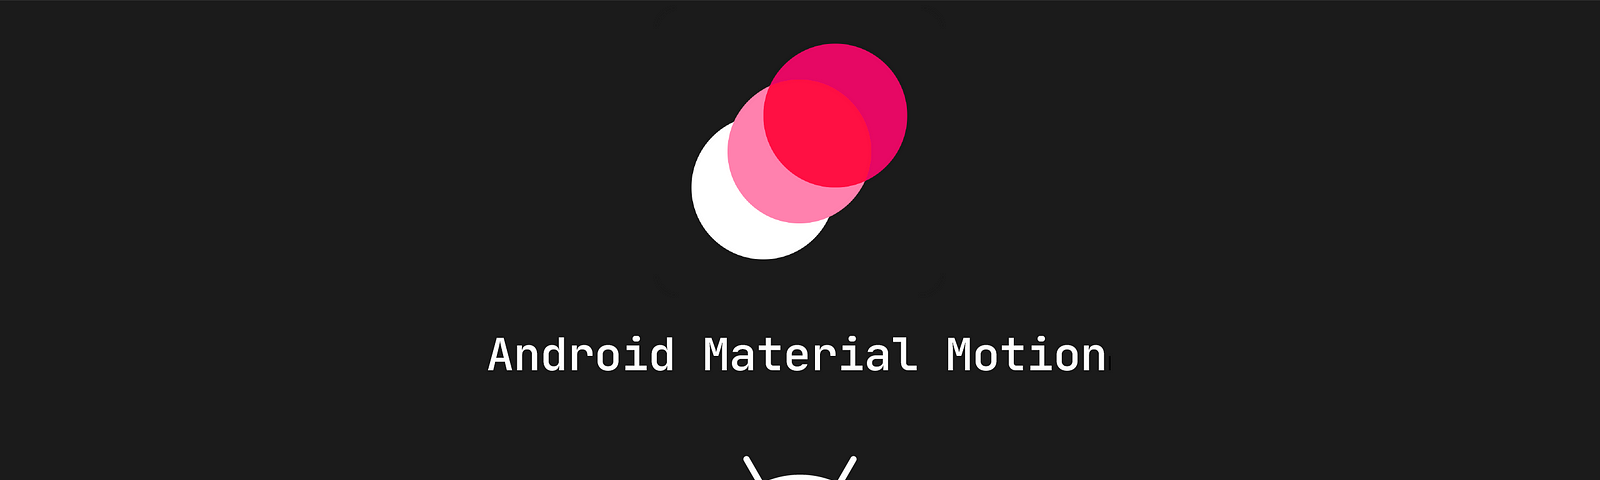 Material Components for Android: Motion | by Sergio Belda | ProAndroidDev